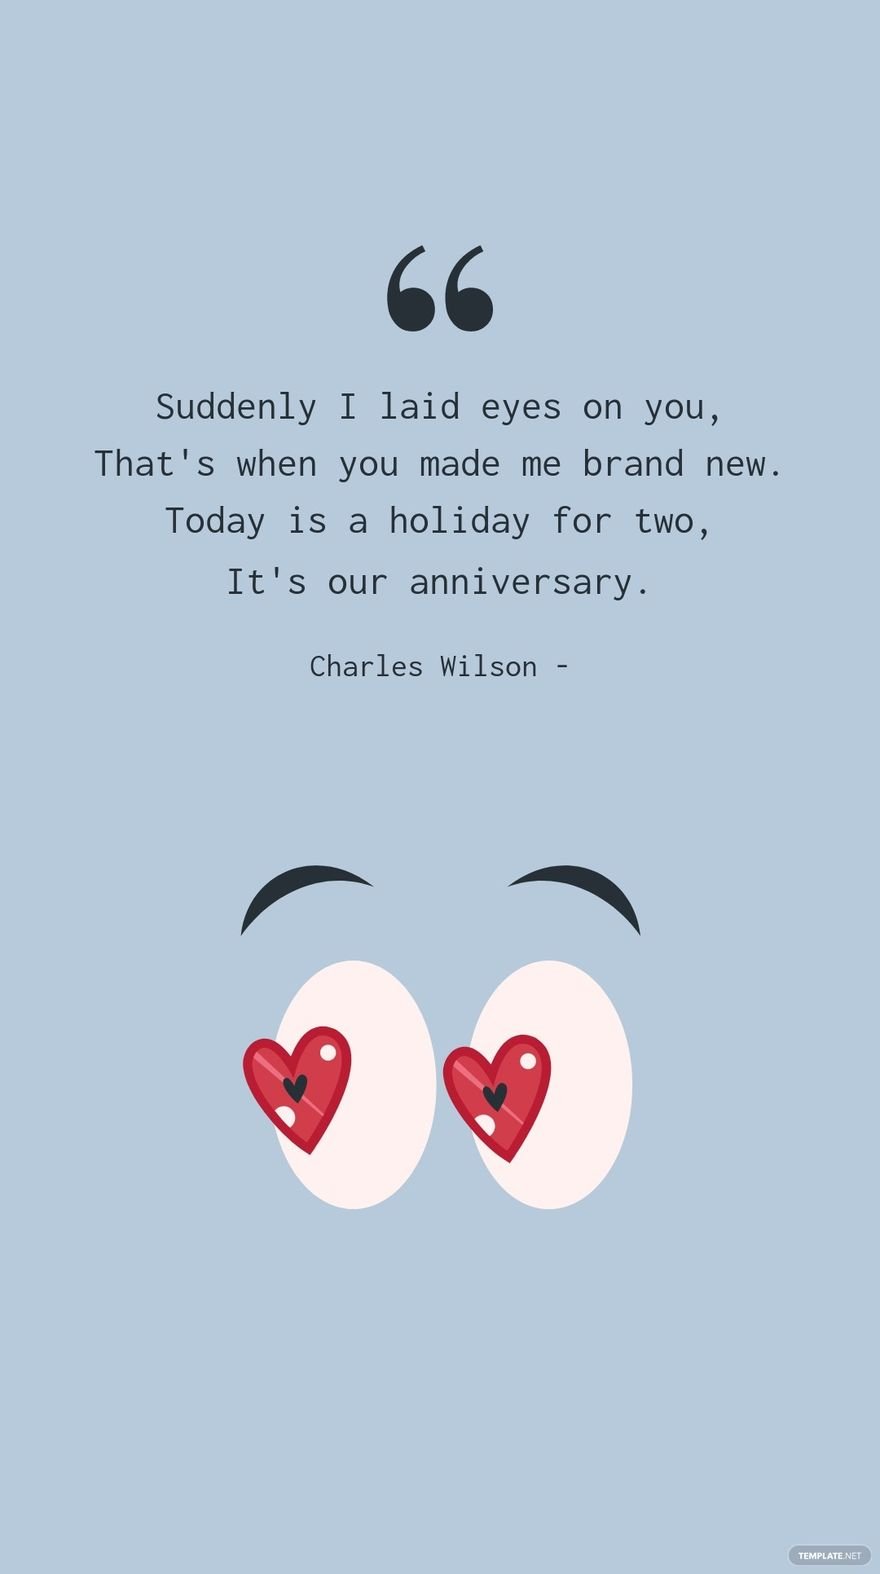 Free Charles Wilson - Suddenly I laid eyes on you, That's when you made me brand new. Today is a holiday for two, It's our anniversary. in JPG